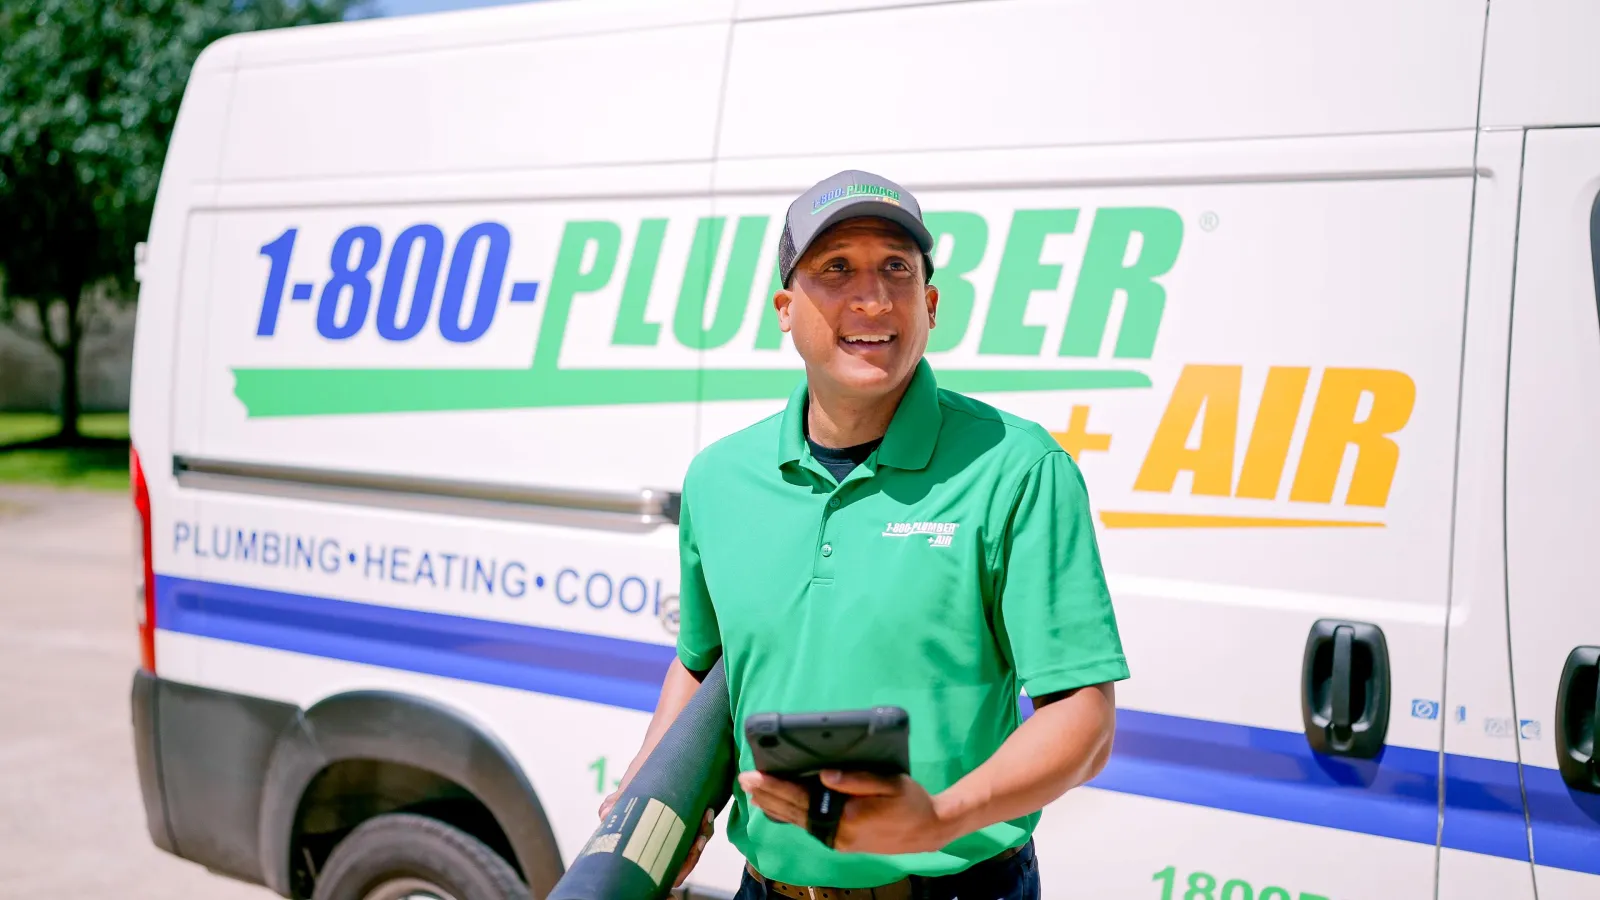 A raleigh bathroom plumber arrives at a home